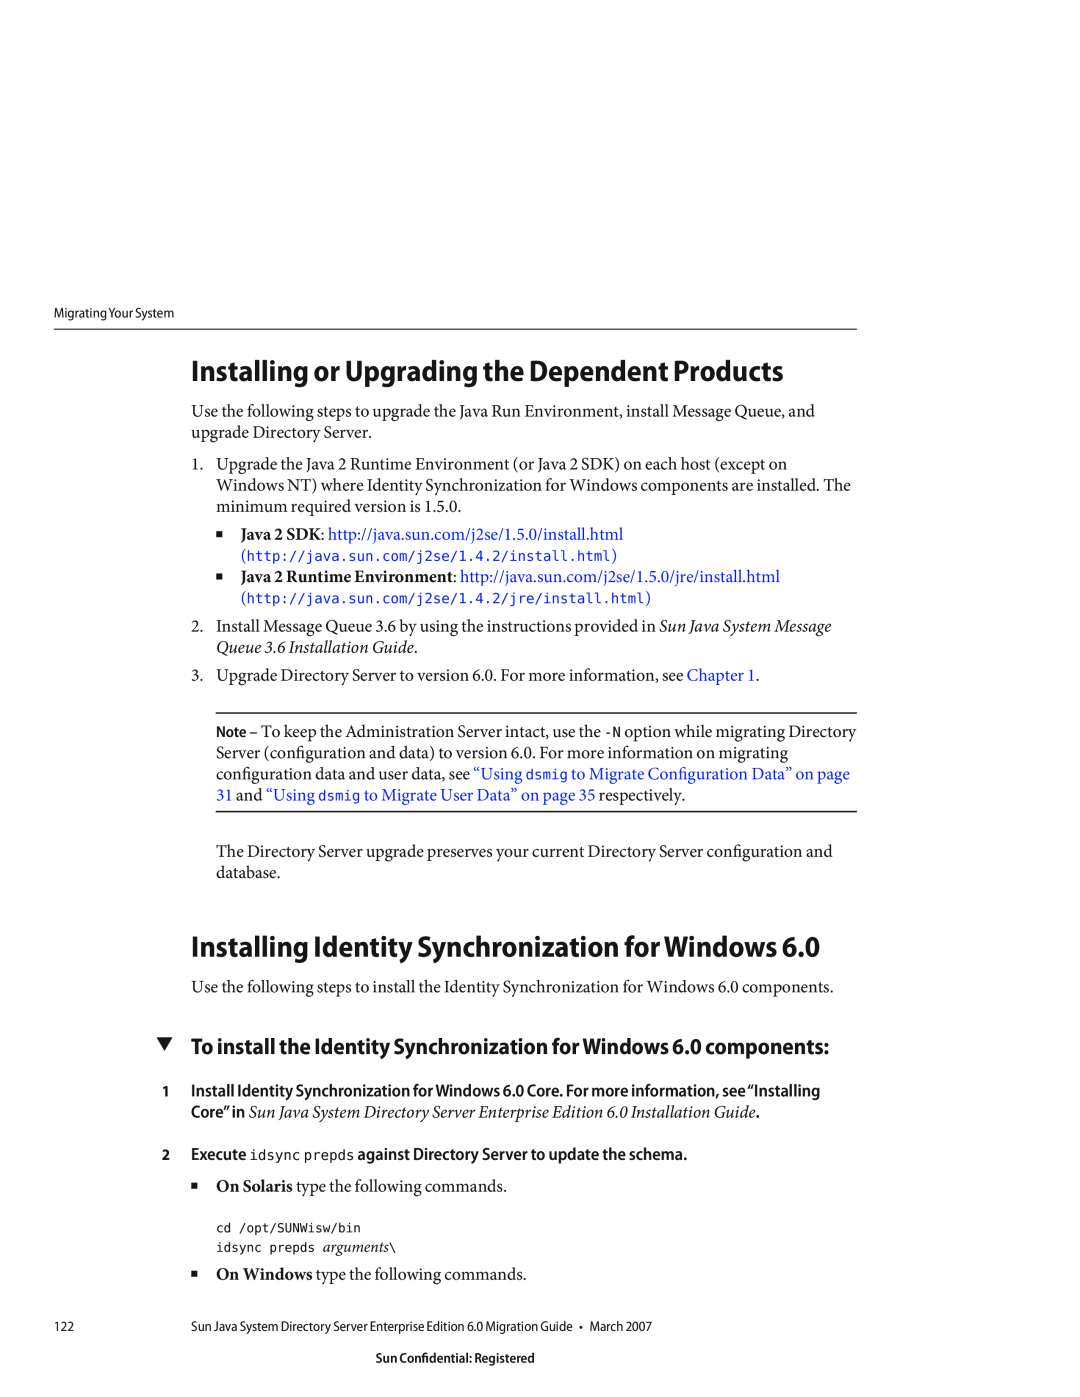 Sun Microsystems 8190994 Installing or Upgrading the Dependent Products, Installing Identity Synchronization for Windows 